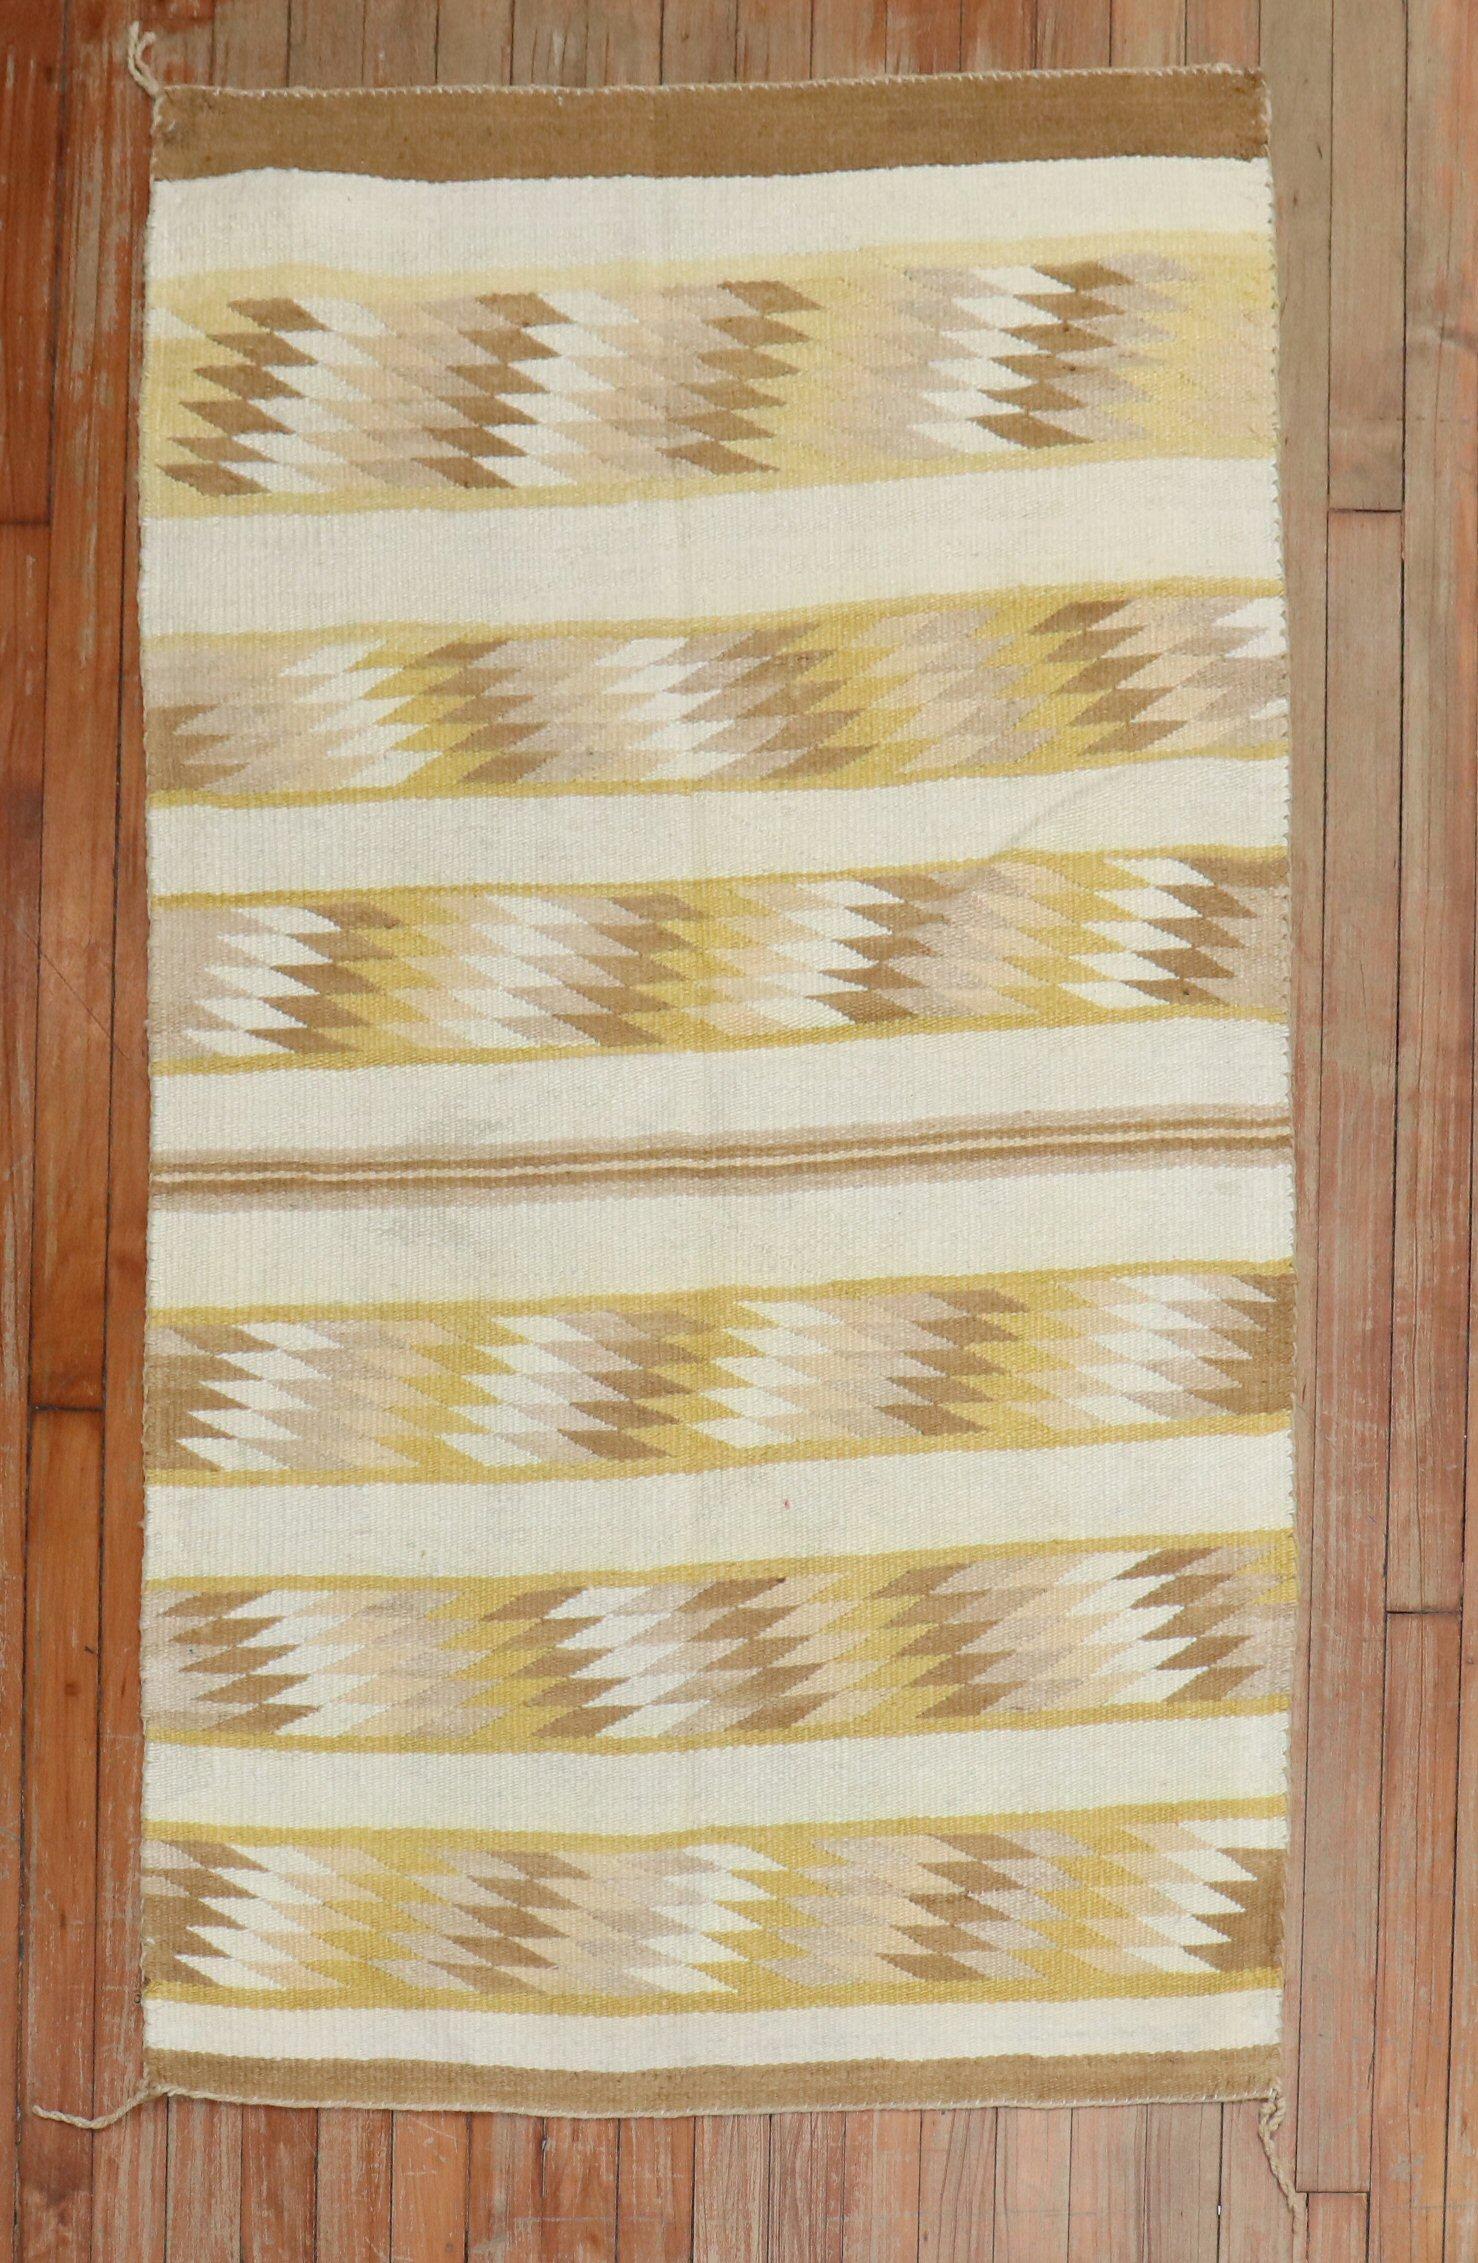 A highly decorative 20th-century American Navajo rug. Ivory, Yelow, and browns

Measures: 3'1'' x 4'11''.